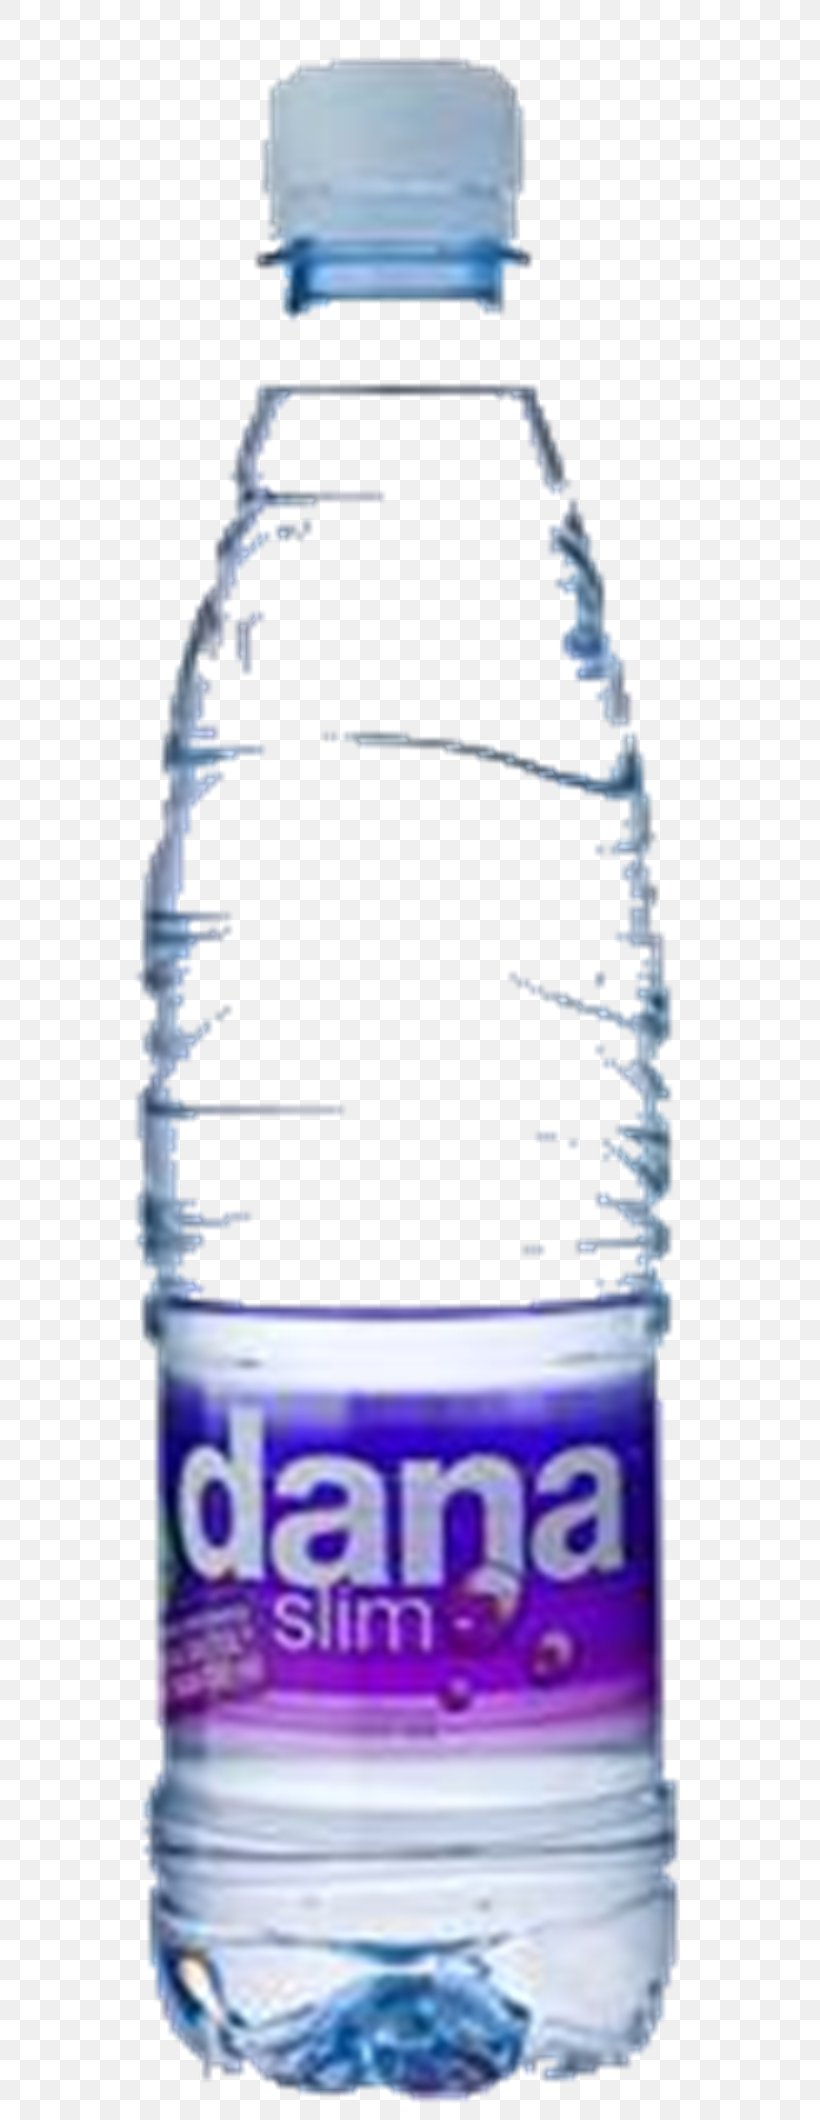 Mineral Water Coffee Water Bottles Drink, PNG, 800x2120px, Mineral Water, Bottle, Bottled Water, Coffee, Dana Download Free